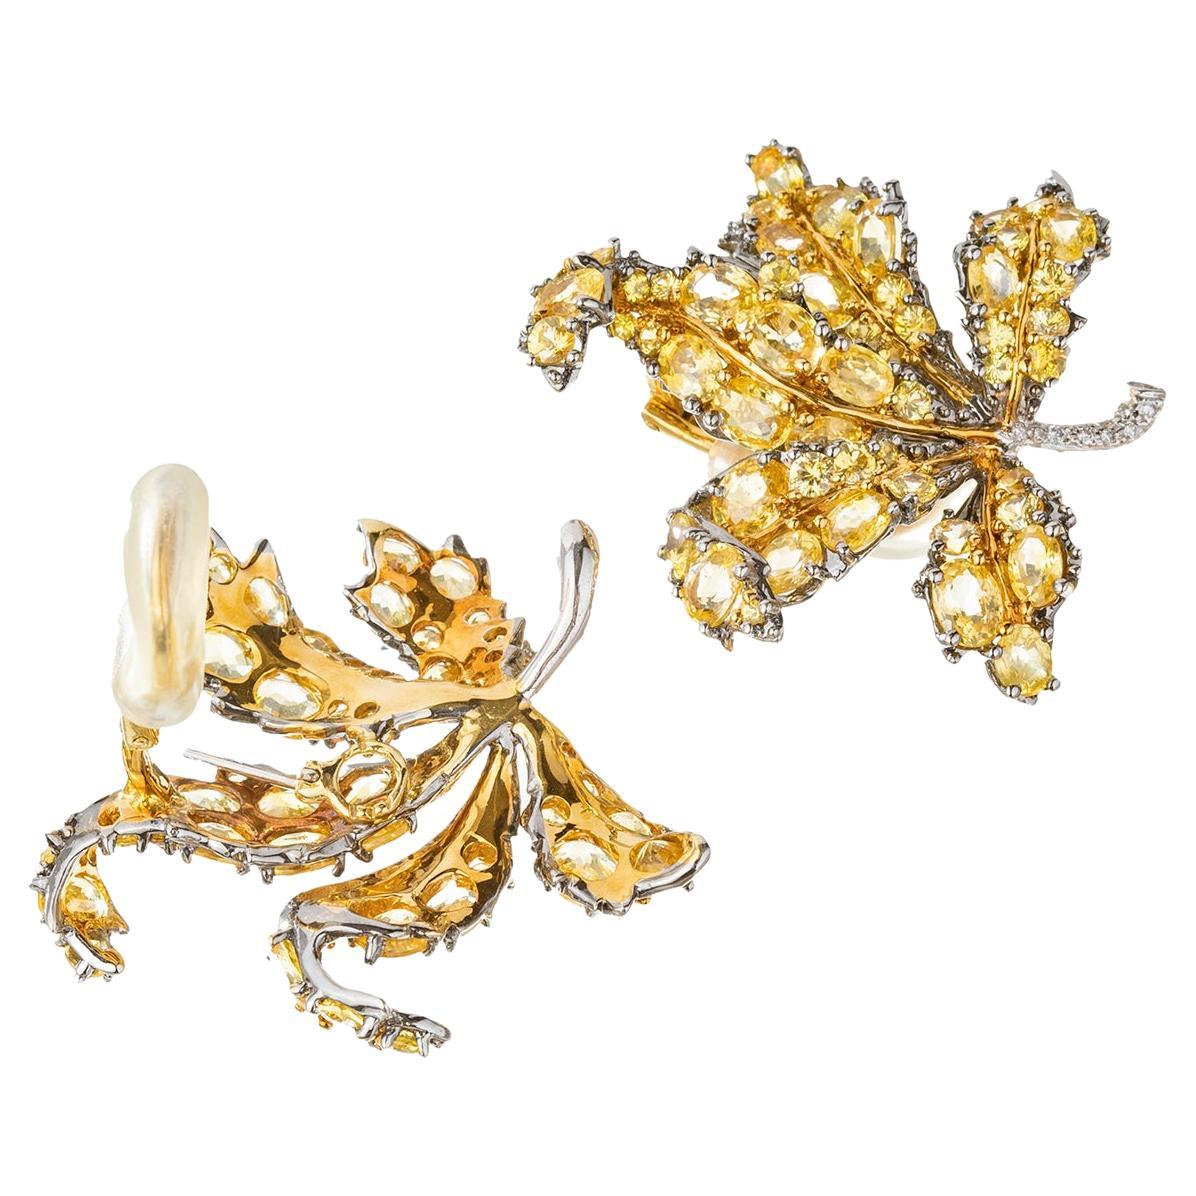 Yellow sapphire leaf earrings in 18k yellow, white and blackened gold with a diamond-set stem.  Oval and round faceted yellow sapphires weighing approximately 15 total carats. Twenty round brilliant-cut diamonds set at the stem of each.  Clip backs